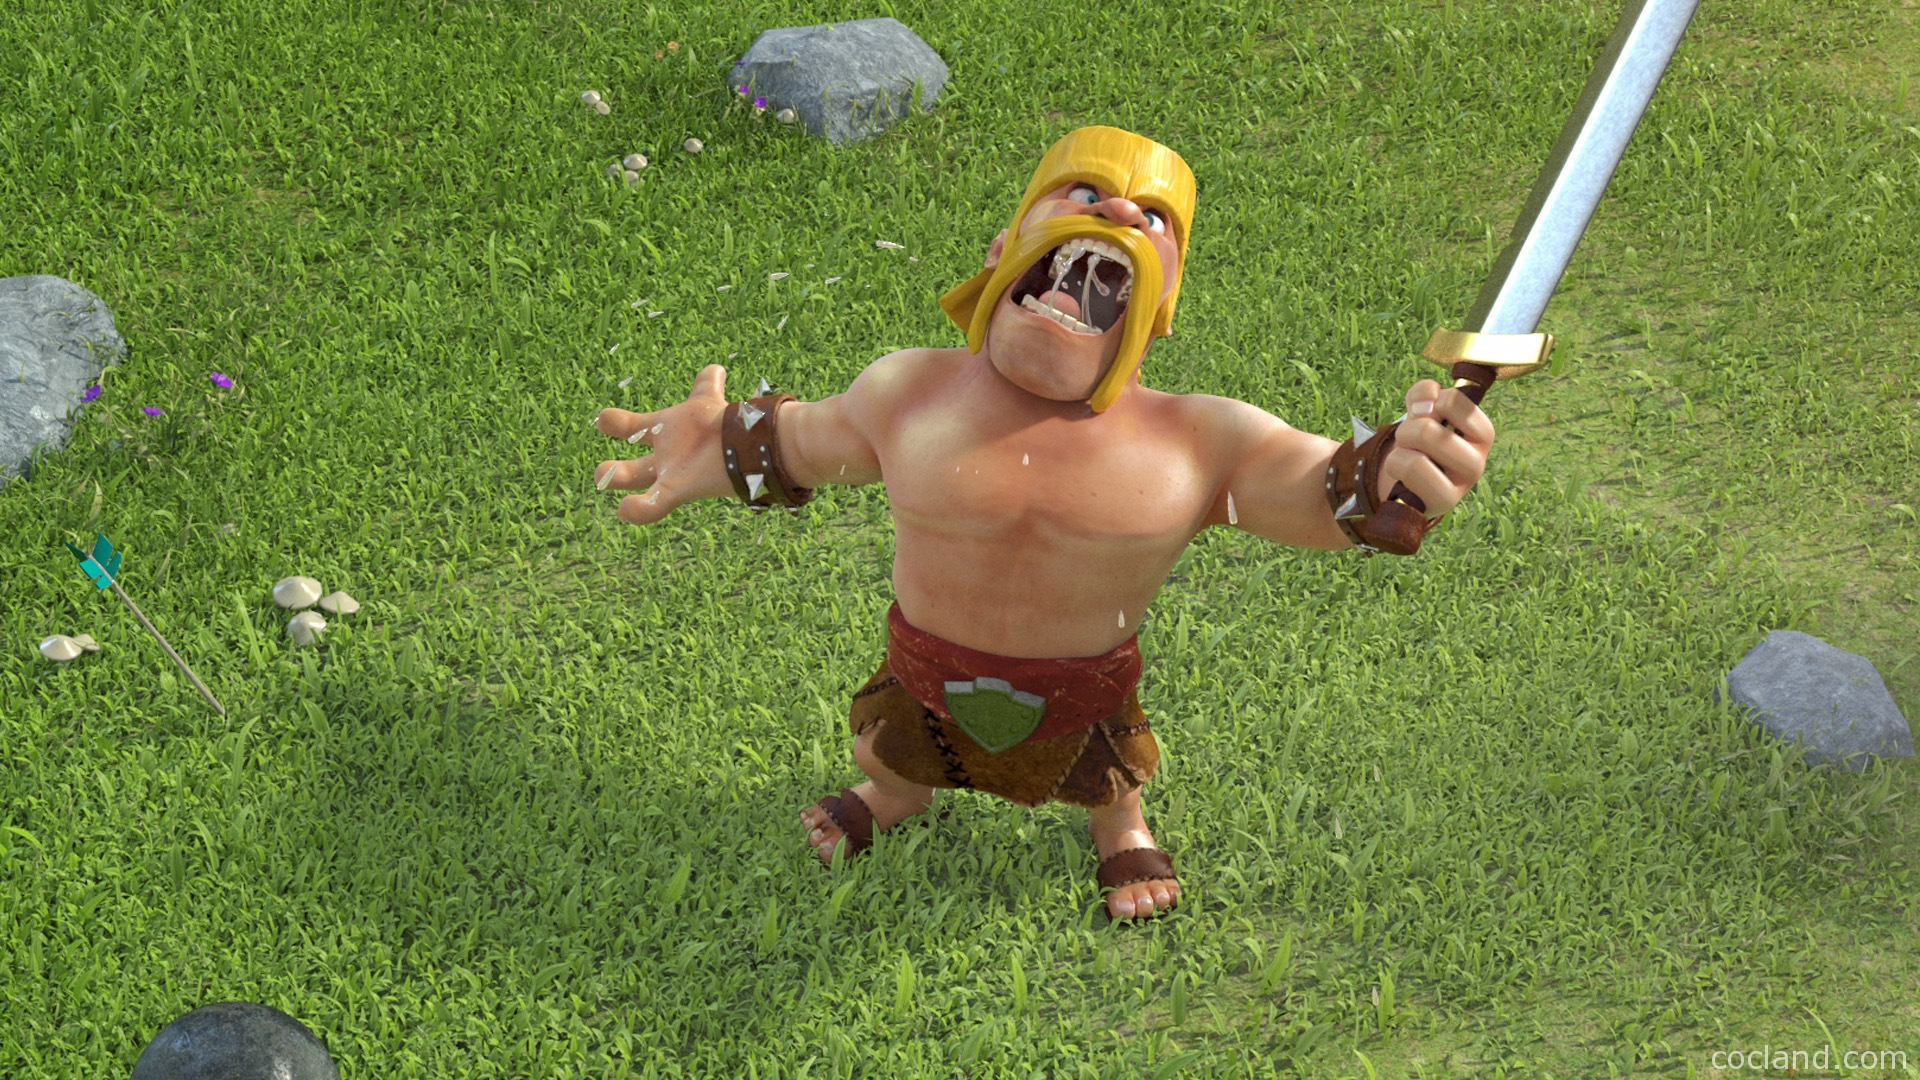 clash of clans wallpaper,grass,lawn,animation,fictional character,action figure